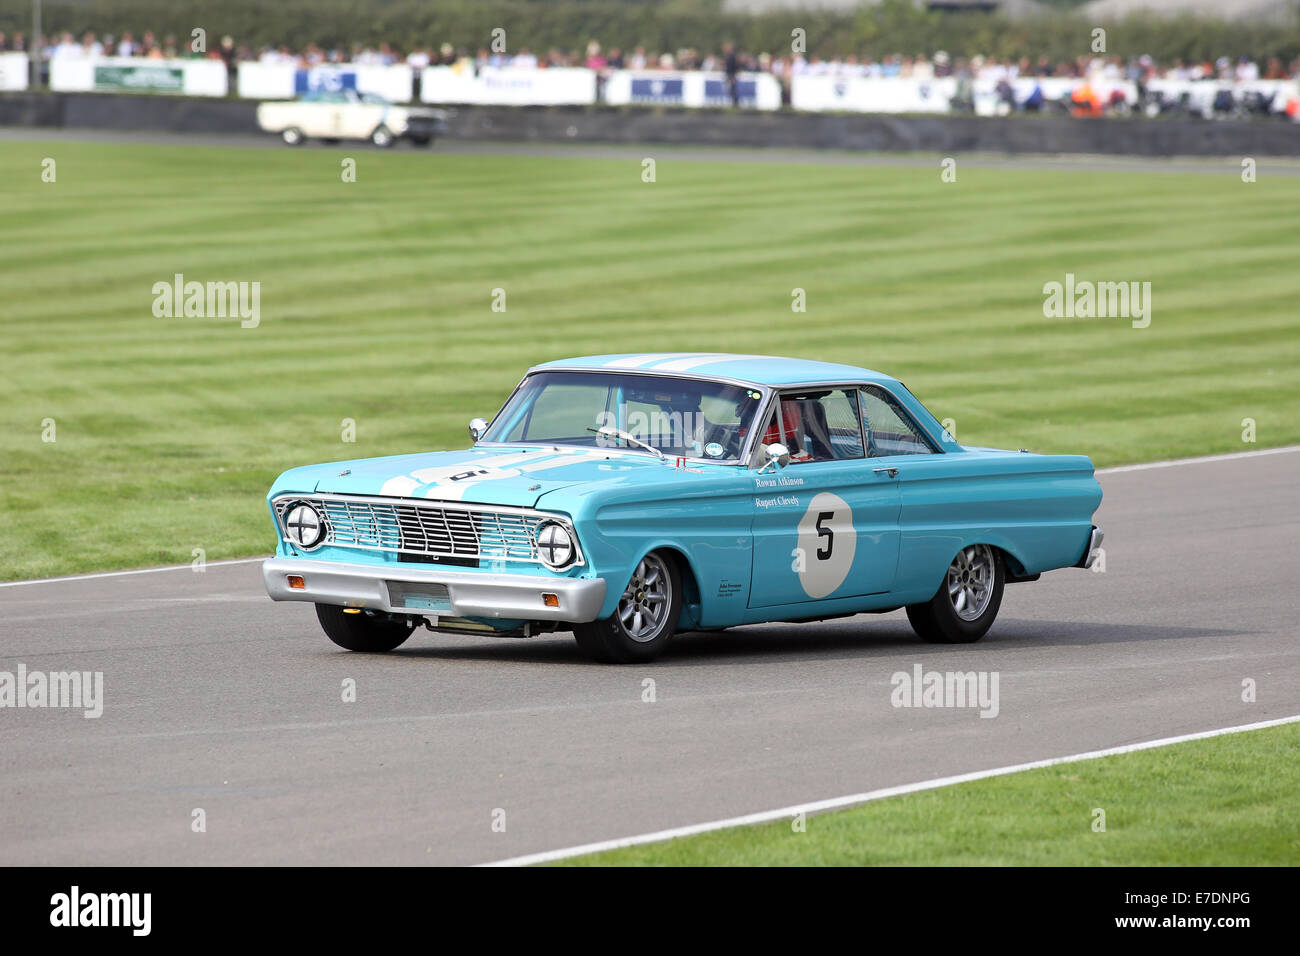 Chichester, West Sussex, UK. 13th Sep, 2014. Pictures from the Goodwood Revival 2014 - The Shelby Cup - A race for saloon cars powered by small-block V8 engines on the 60th anniversary of the small-block V8 engine. A large number of Ford Mustangs mariking the car's 50th anniversary took on other American classics such as Ford Falcon, Plymouth Barracuda, Mercury Comet Cyclone and Dodge Dart. Picture shows: Rowan Atkinson (Mr Bean) driving a 1964 Ford Falcon Spirit Credit:  Oliver Dixon/Alamy Live News Stock Photo